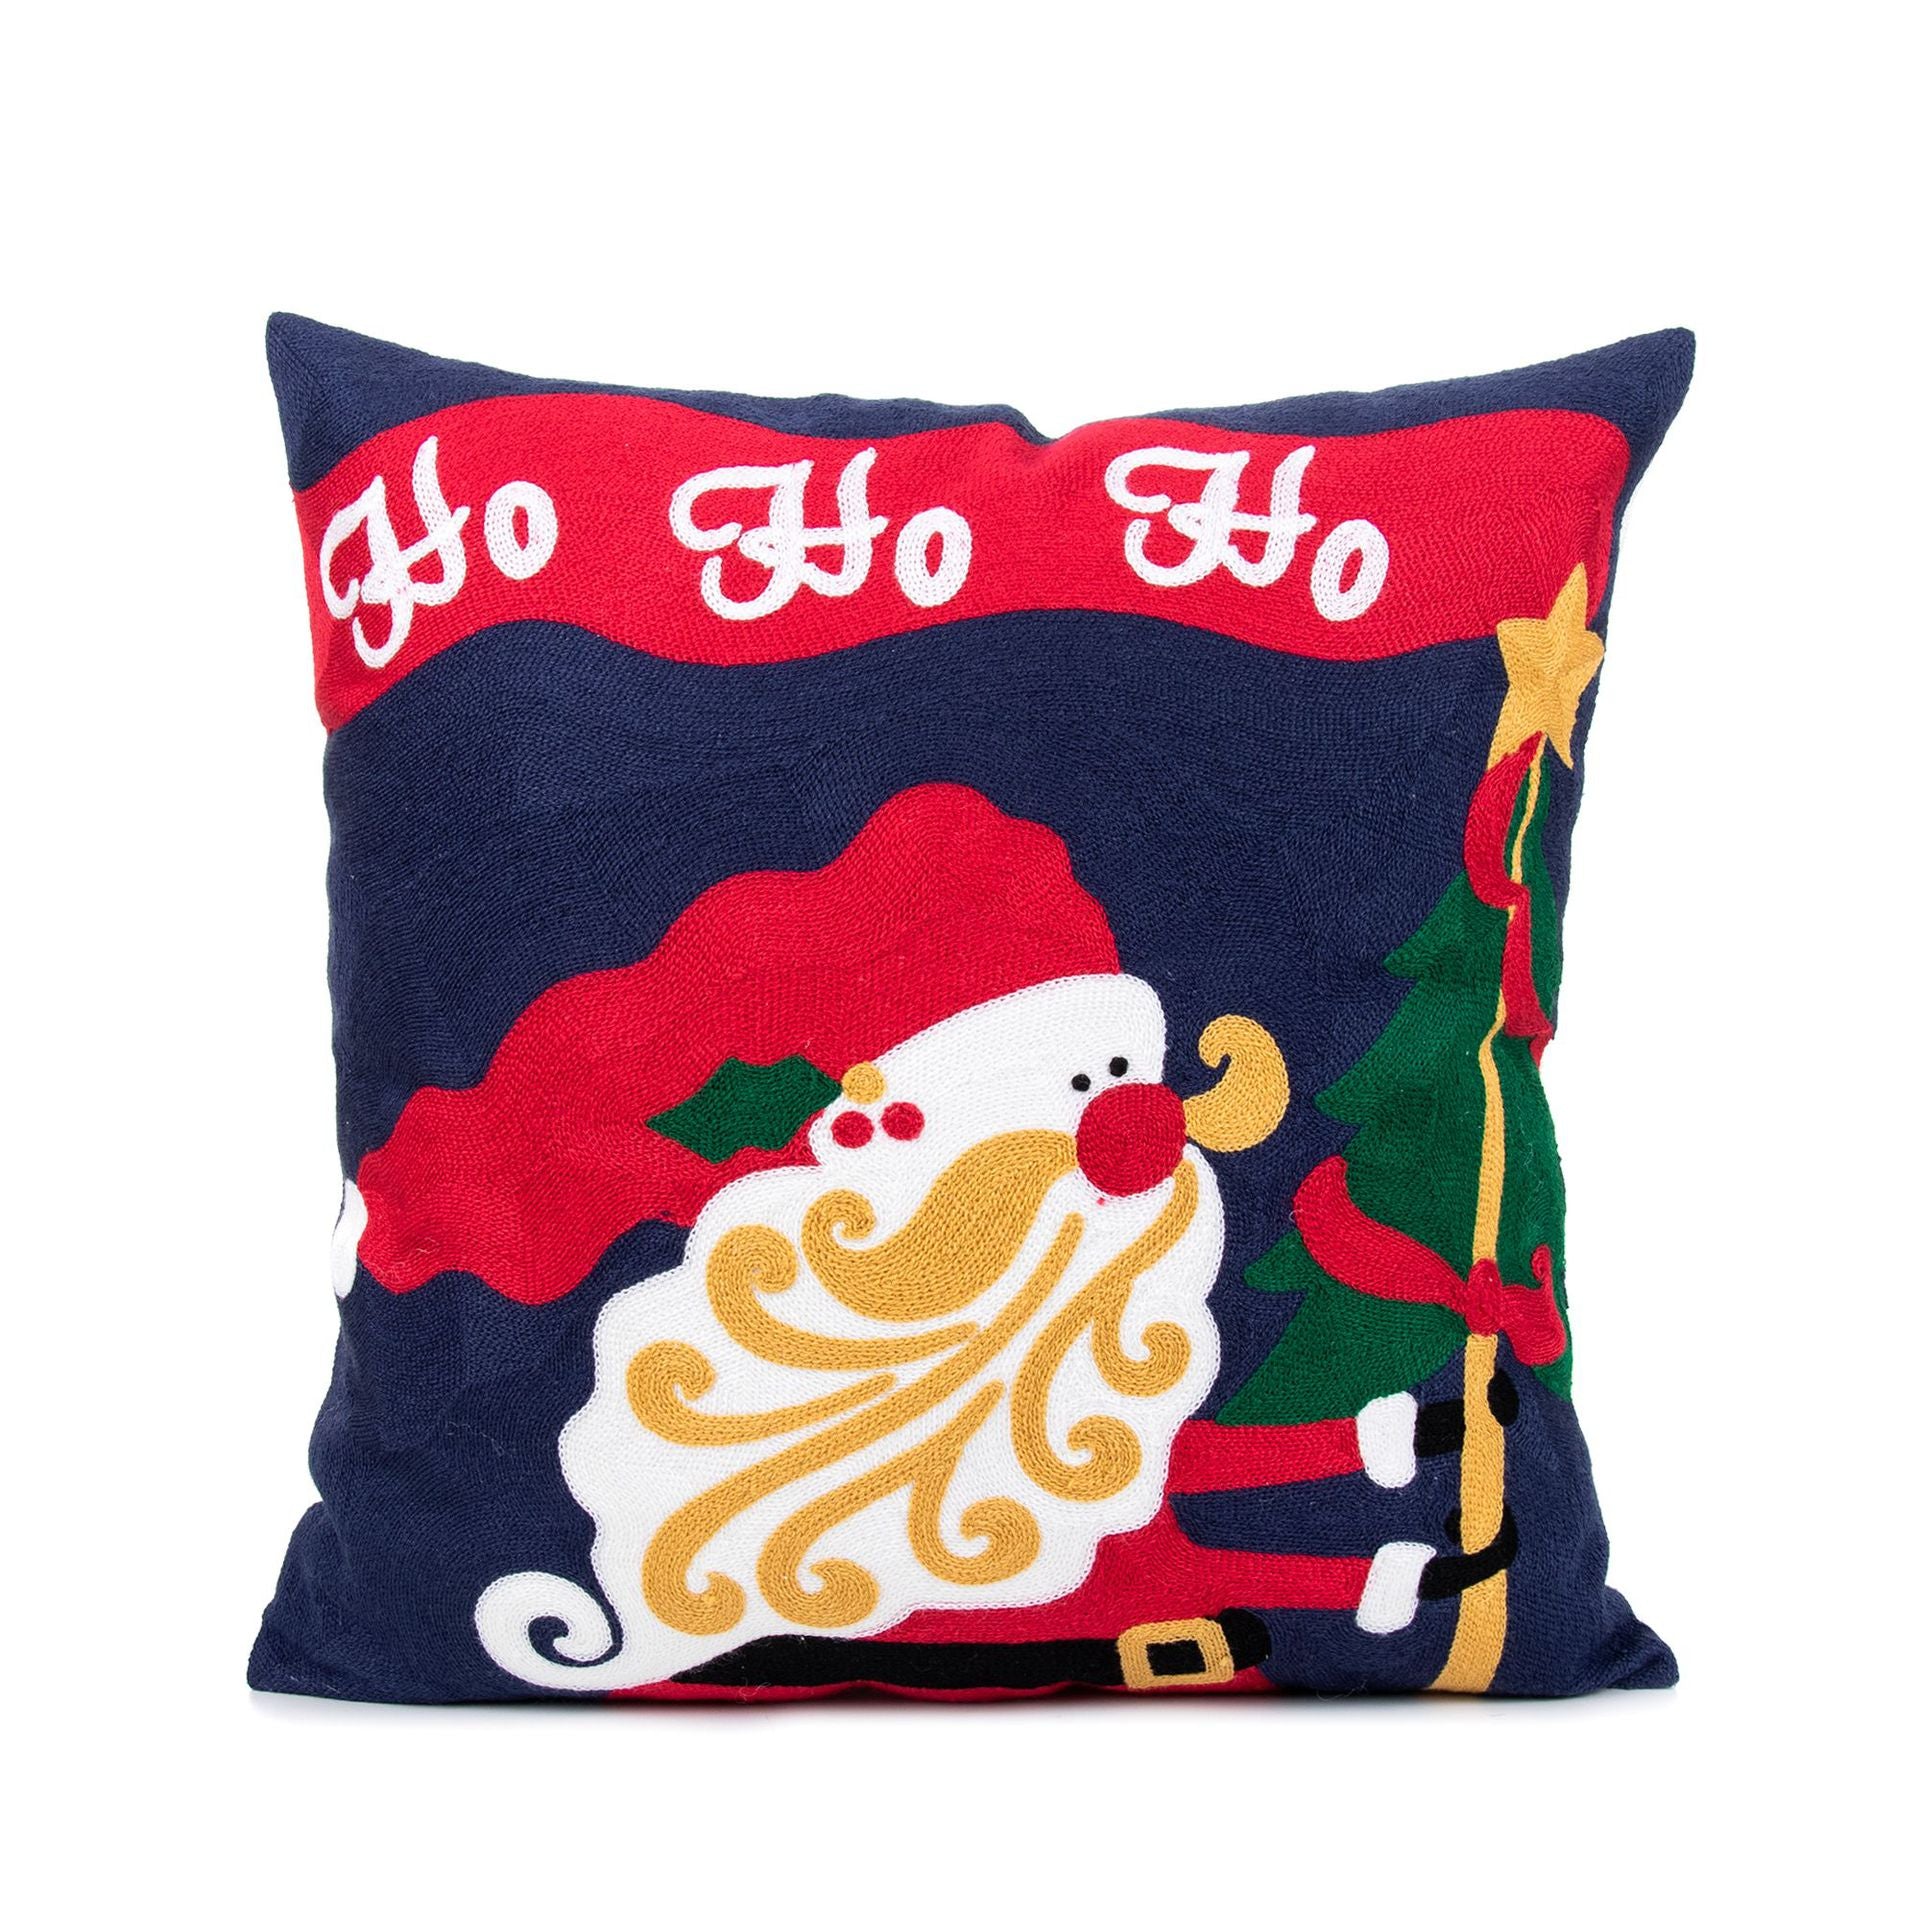 Household Supplies New Christmas Embroidery Pillow Case